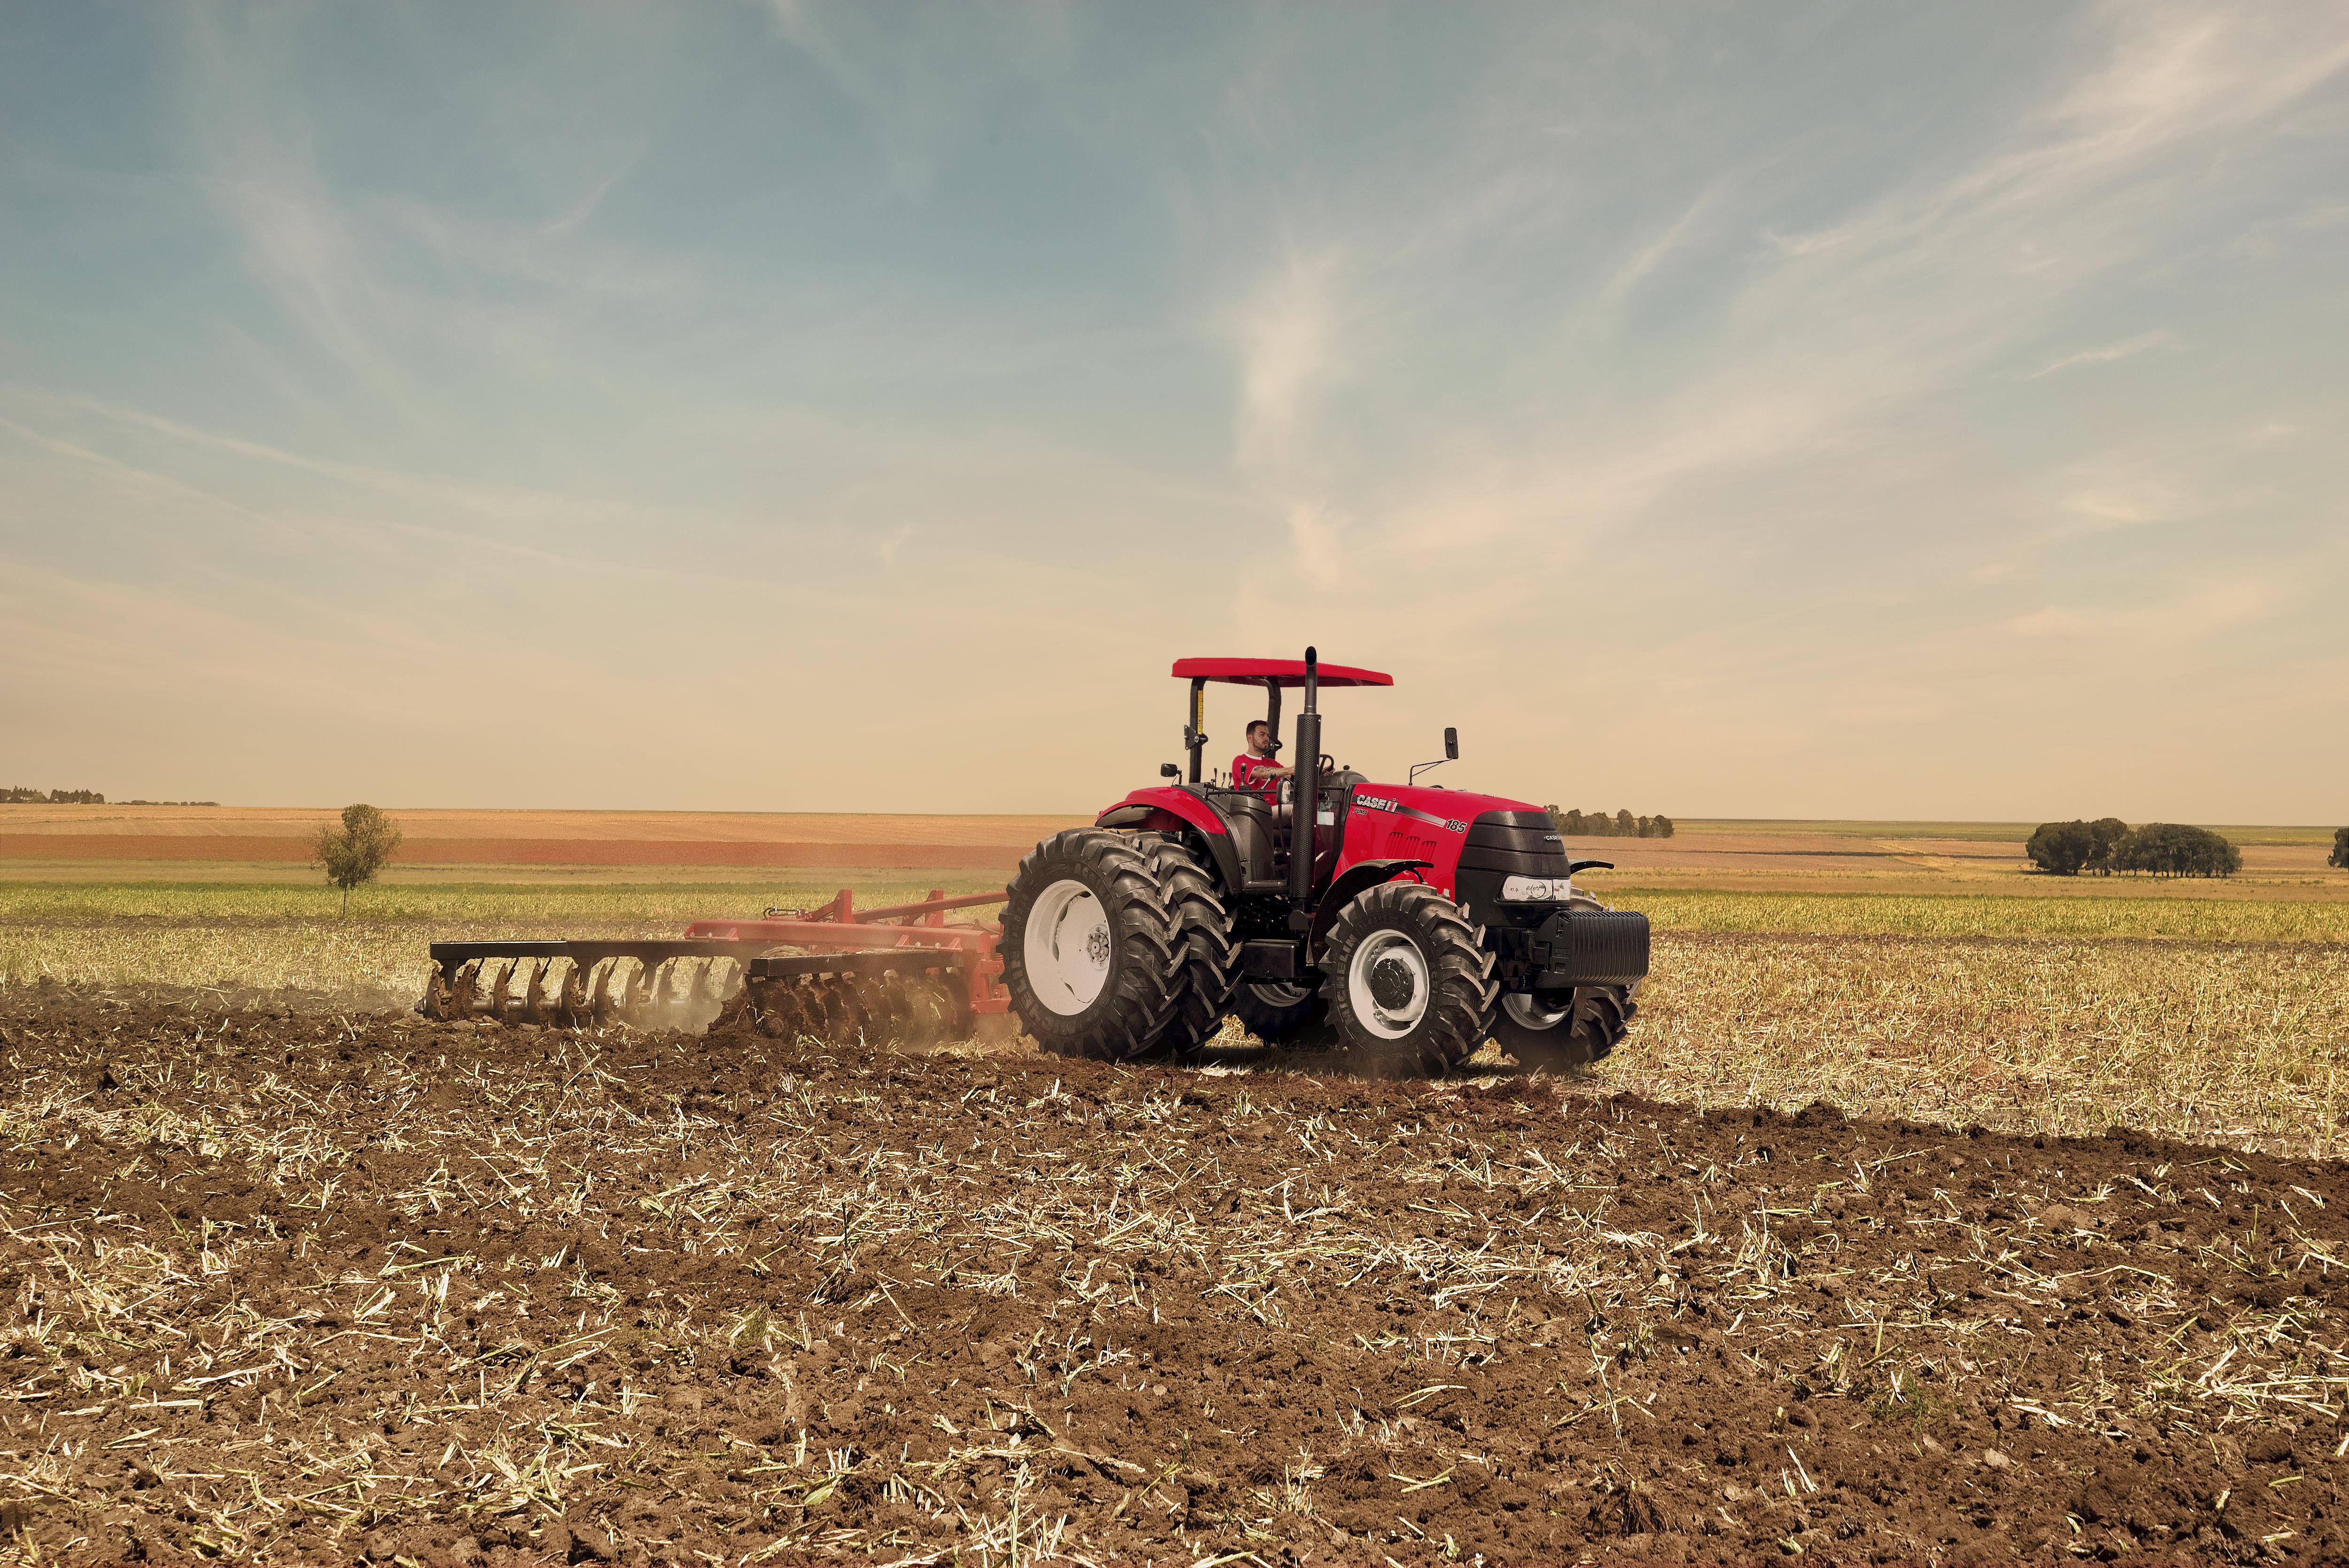 CASE IH EXTENDS POPULAR PUMA LINE OF TRACTORS WITH TWO HIGHER-HORSEPOWER ROPS MODELS